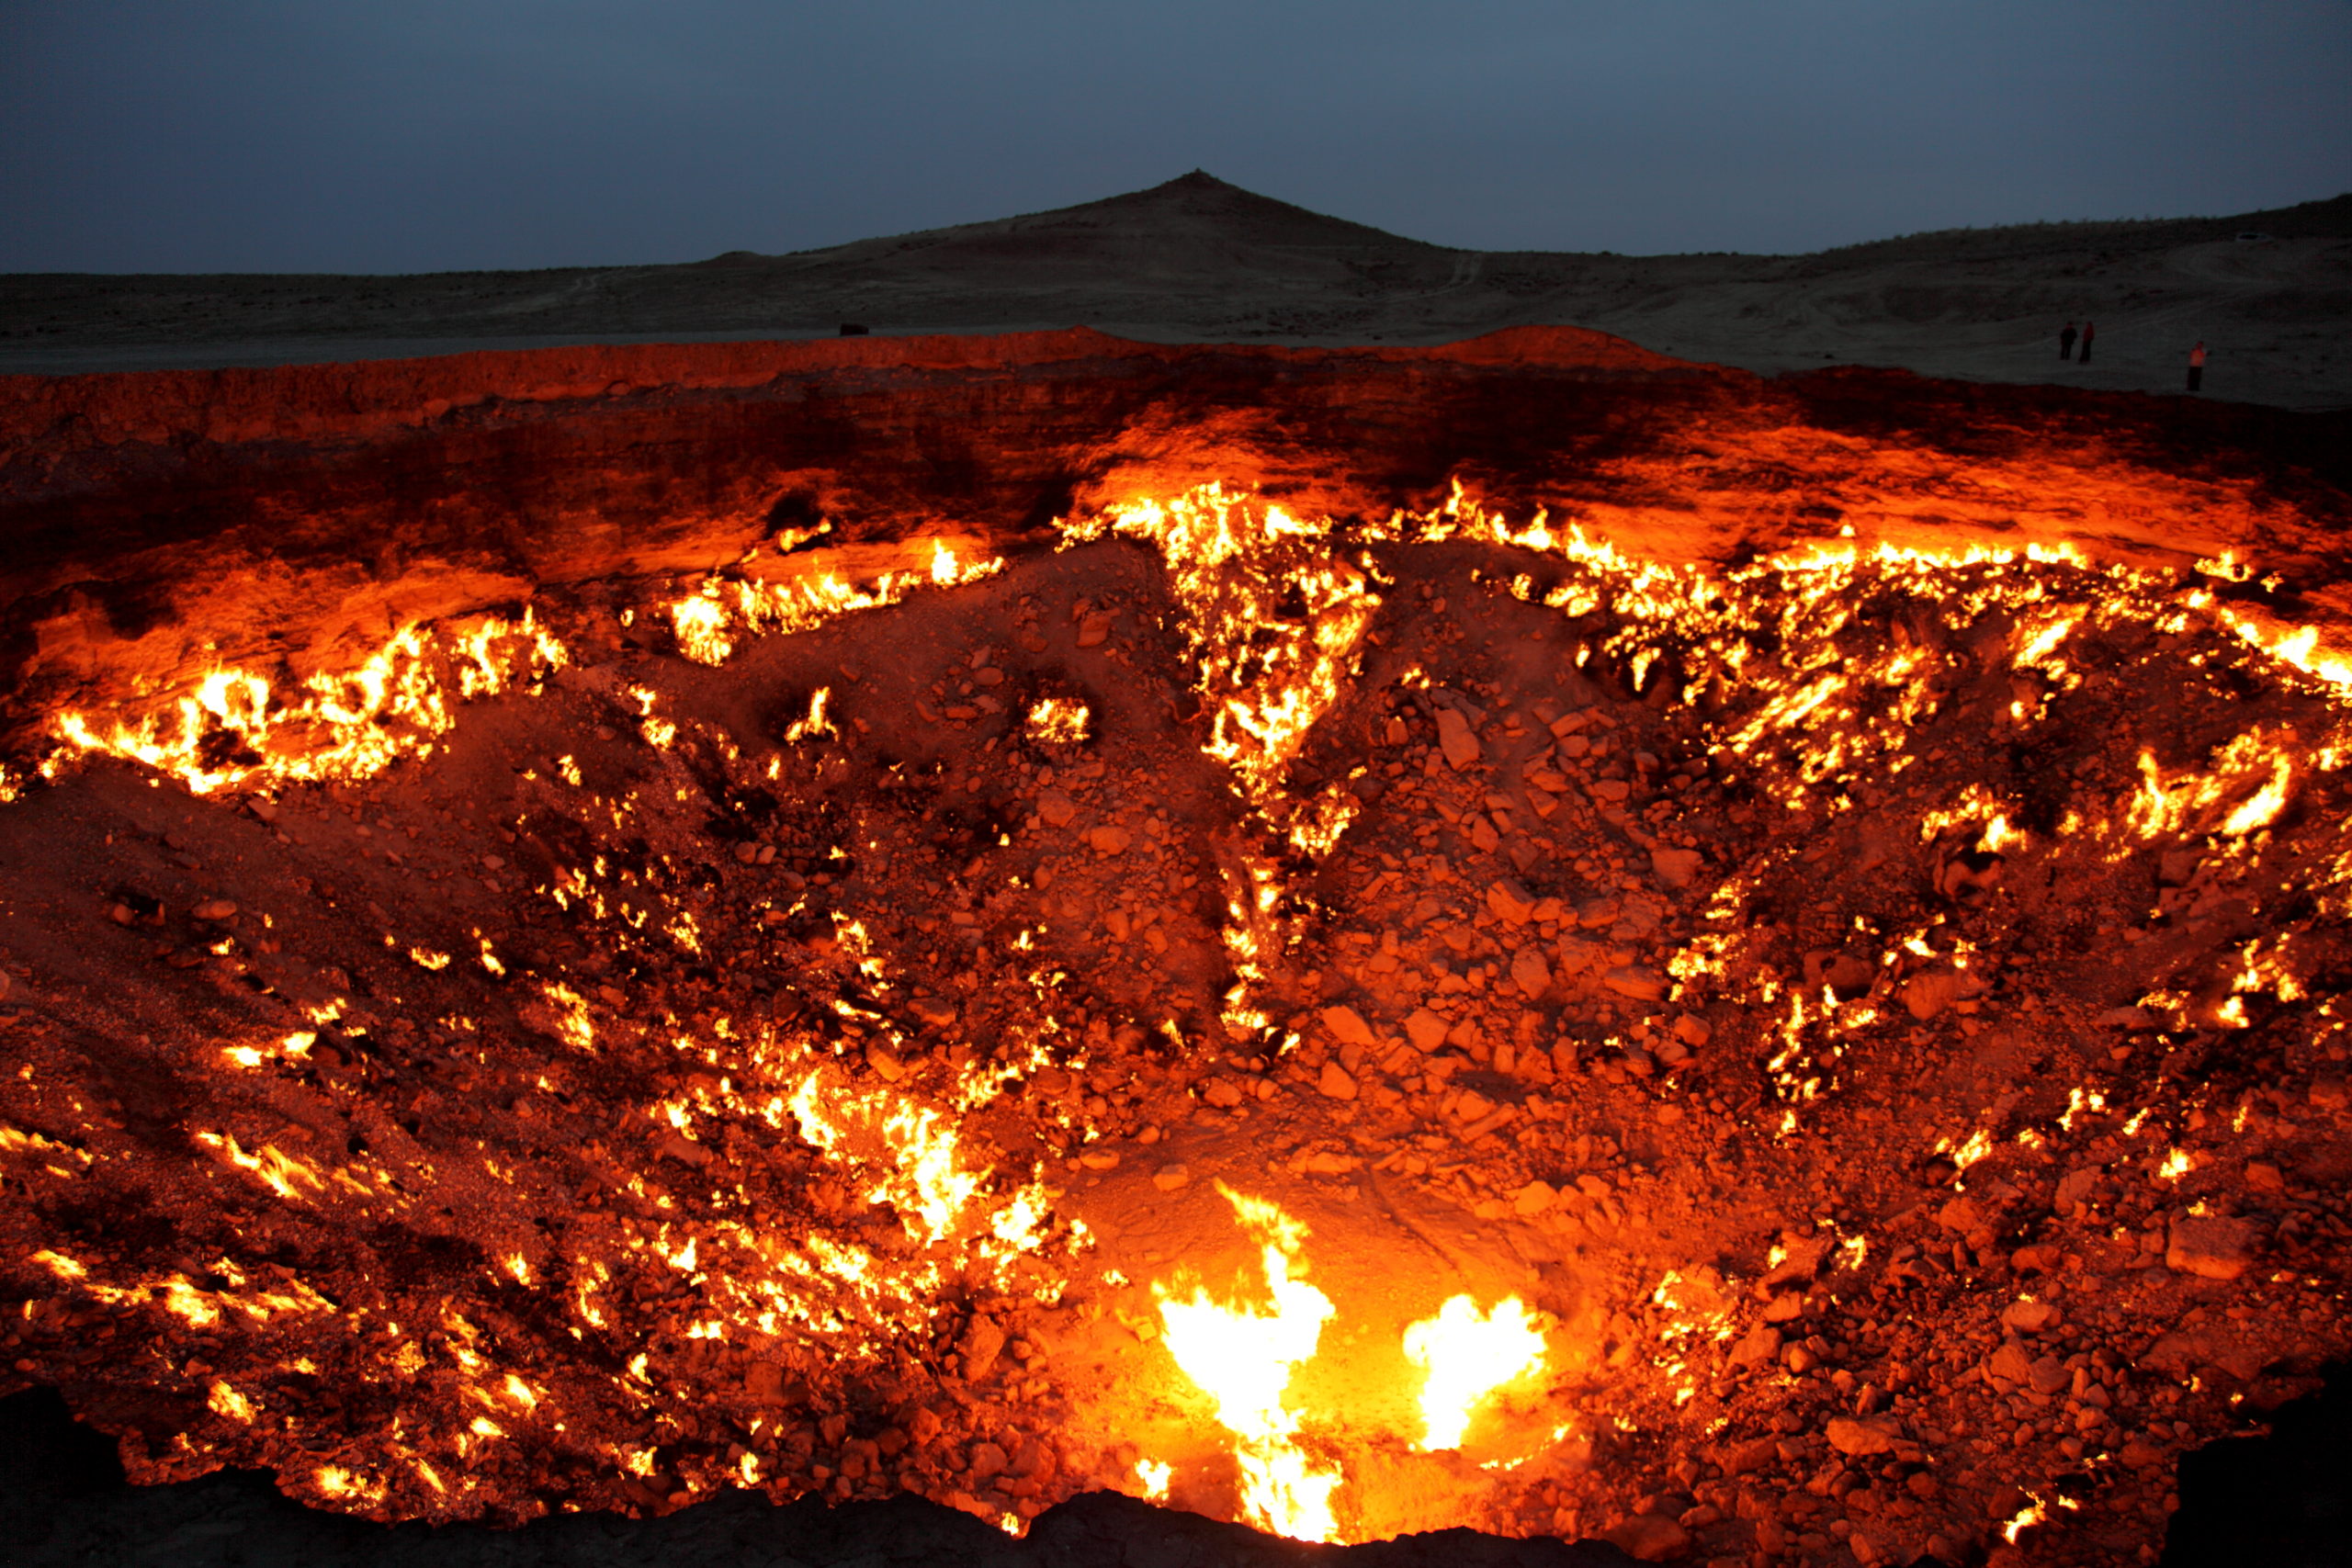 Weird Landmarks You'll Want to Visit - The Door to Hell, Turkmenistan